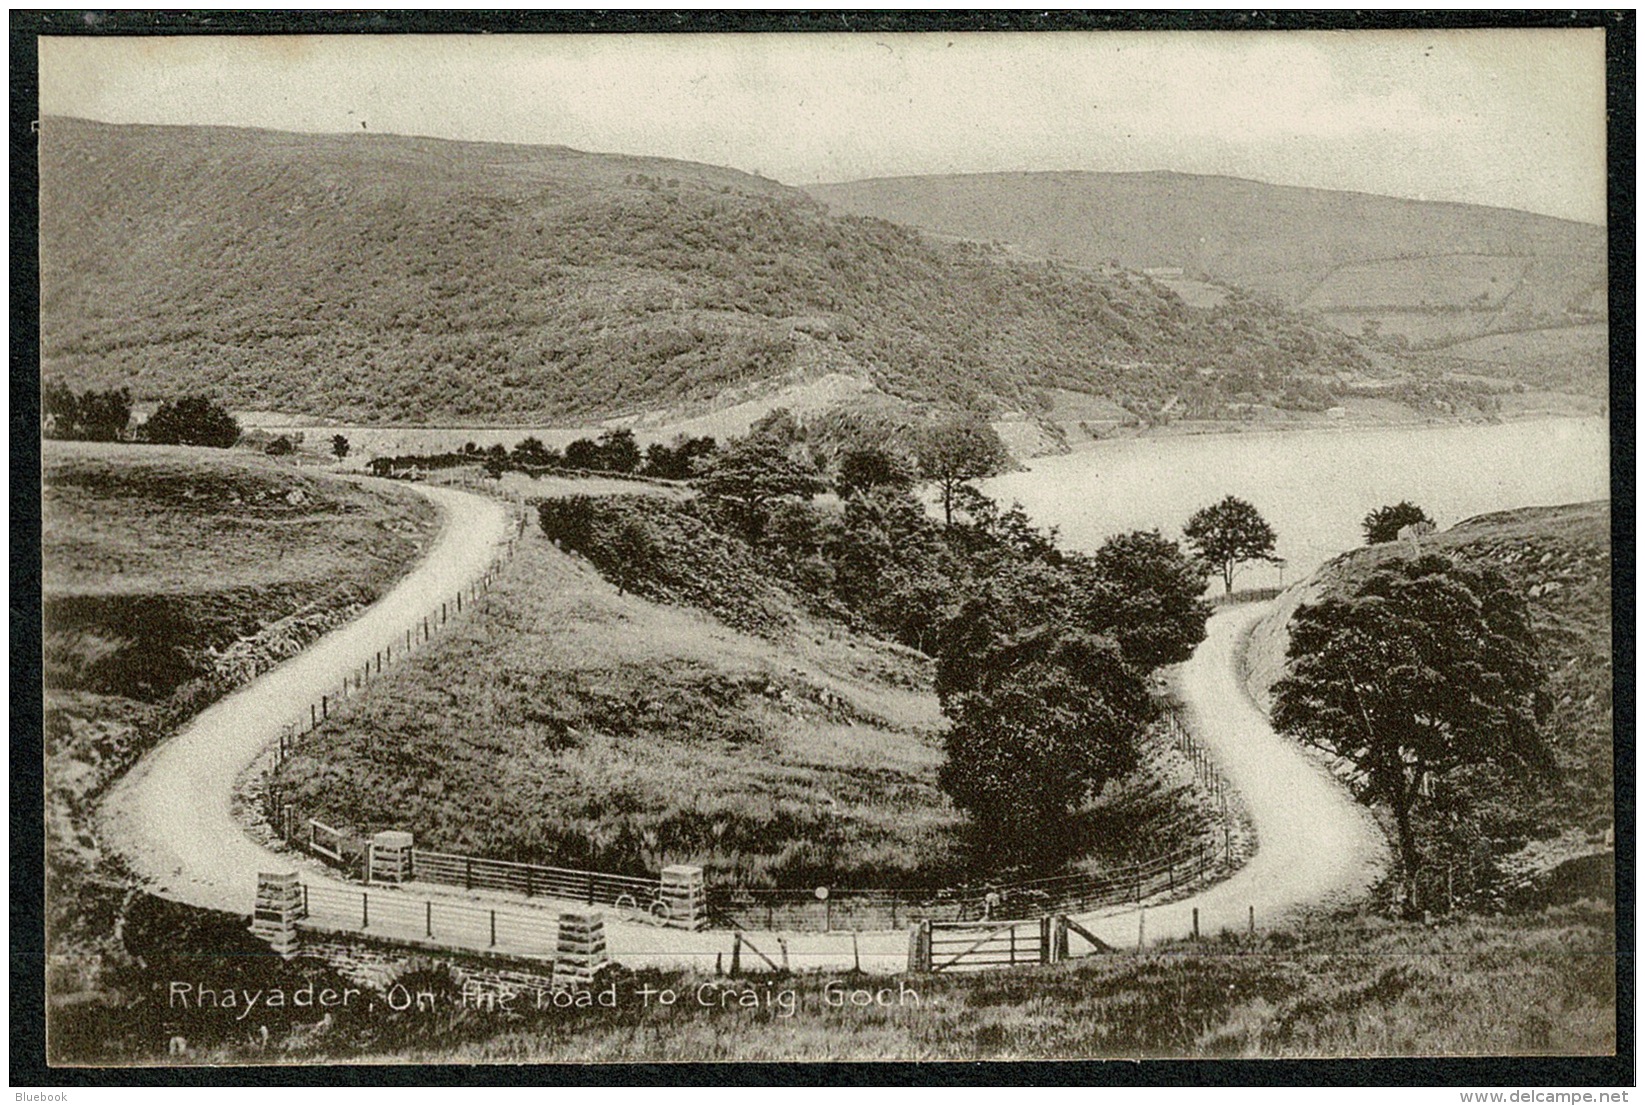 RB 1214 - Early Postcard - Rhayader On The Road To Craig Goch - Radnorshire Wales - Radnorshire